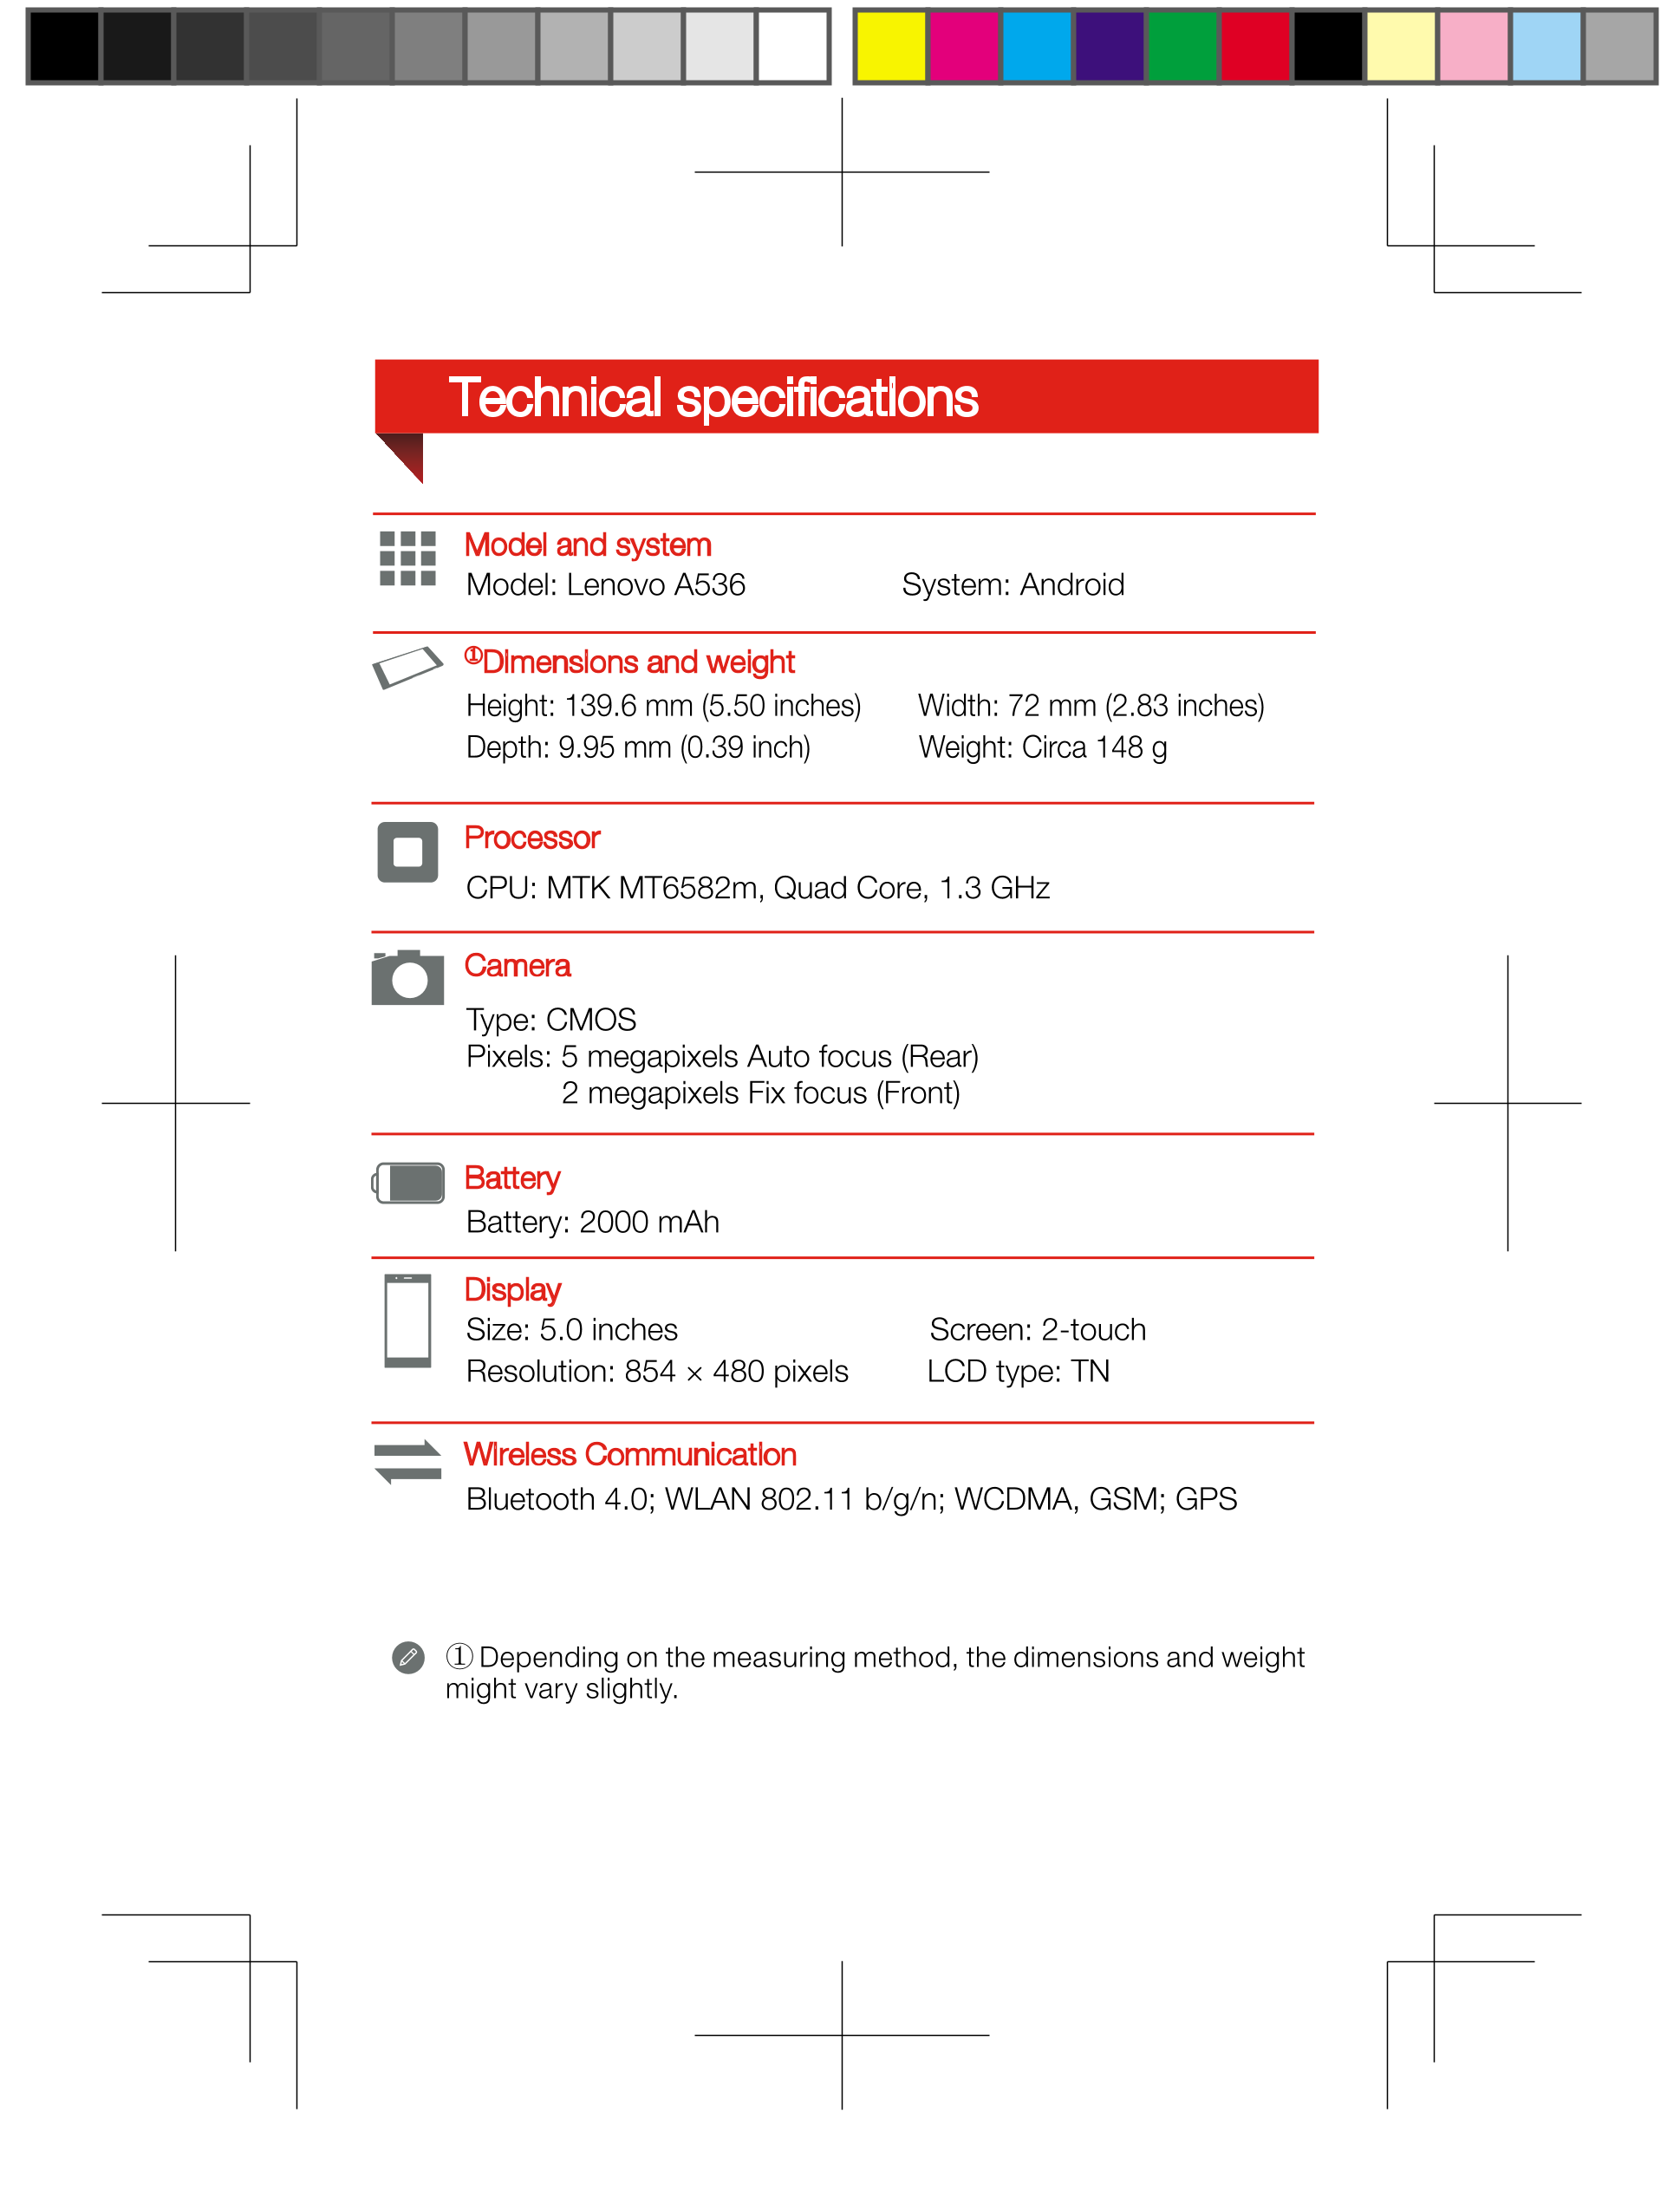 Technical speciﬁcations
Model and system
Model: Lenovo A536                  System: Android 
Dimensions and weight
Height: 139